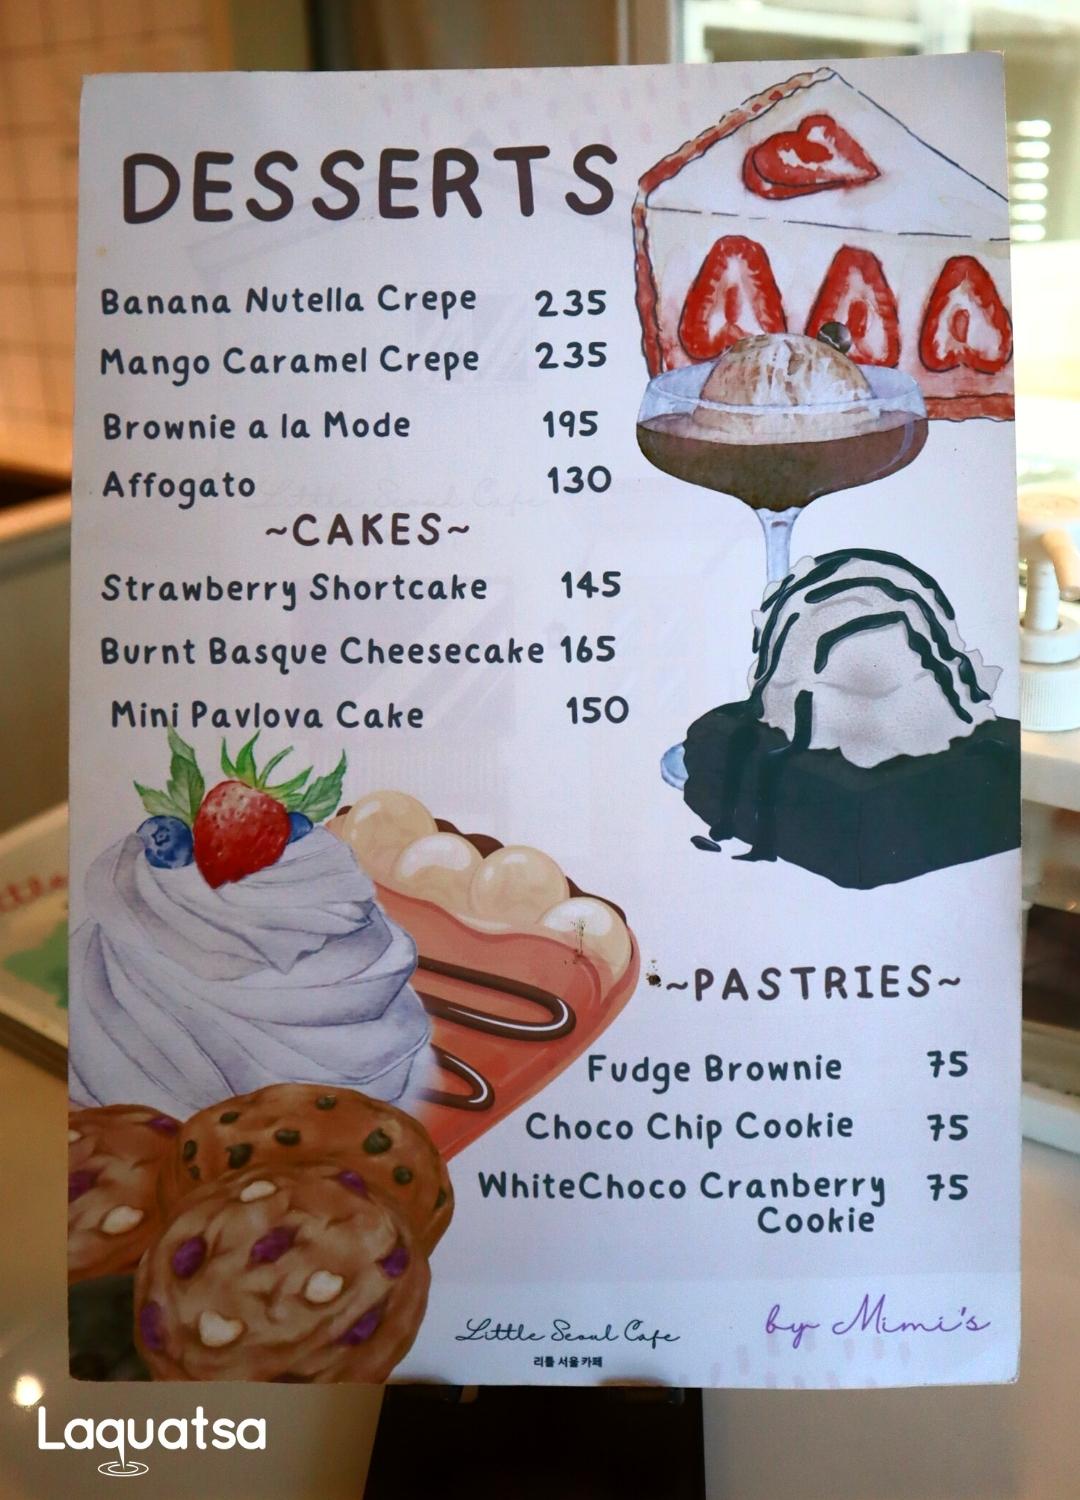 Little Seoul Cafe Menu - Desserts and Pastries